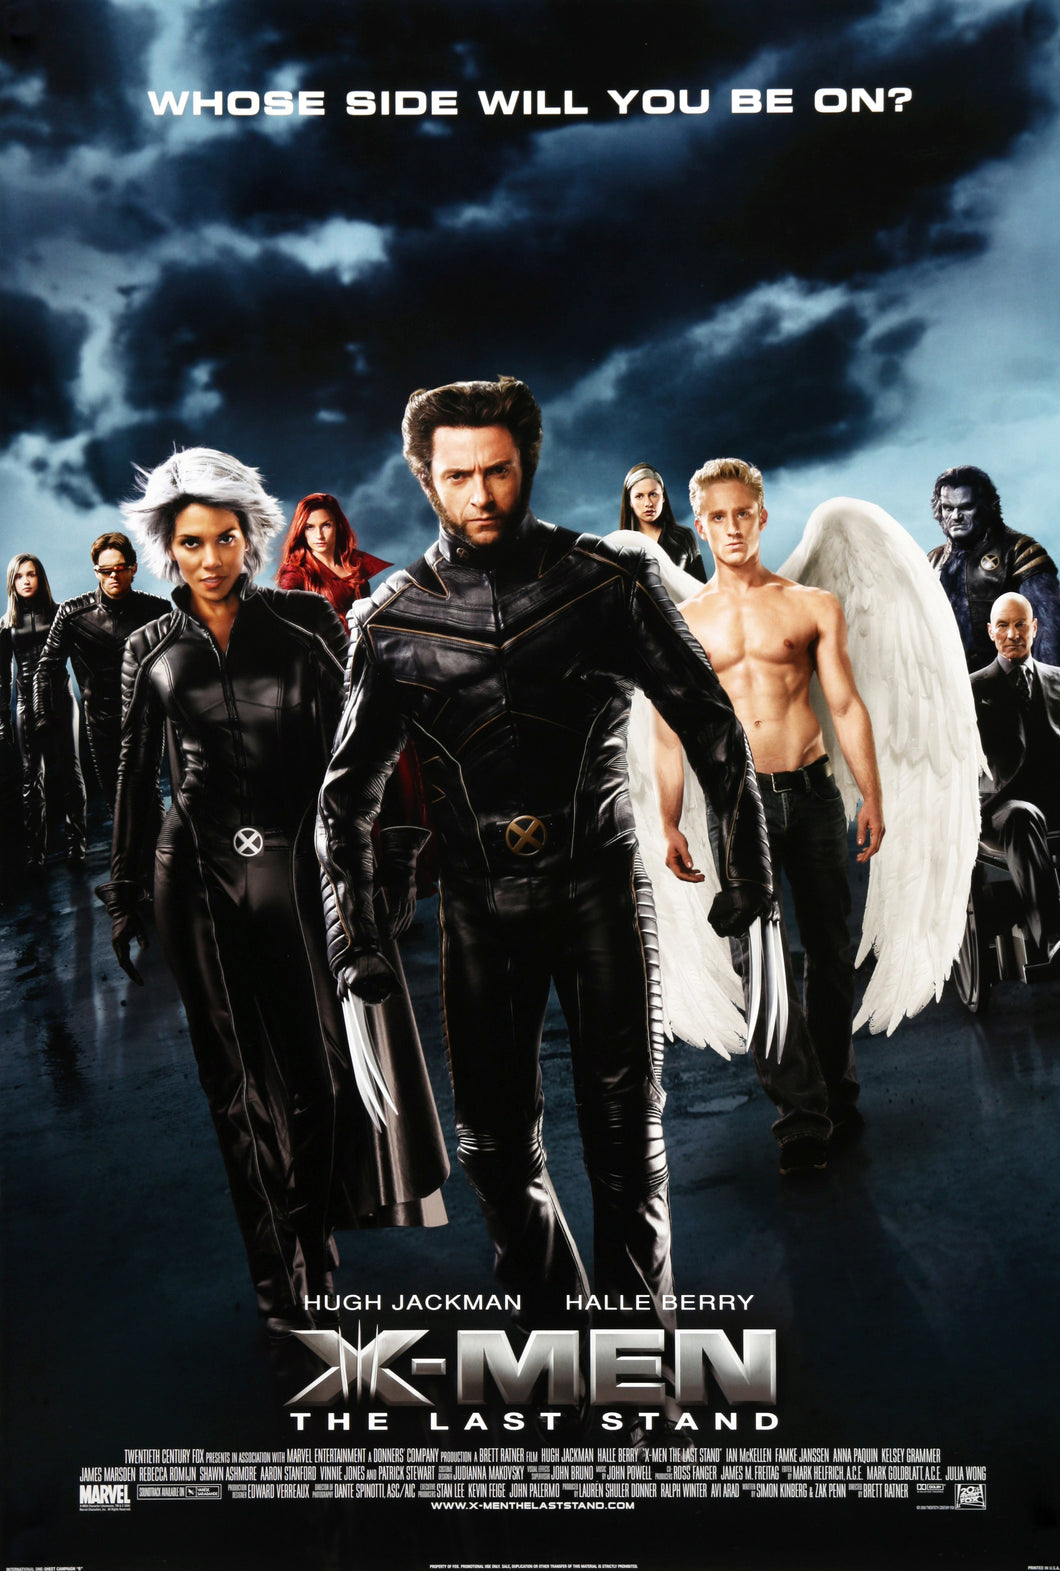 Poster Pelicula X-Men III: The Last Stand 8 â€“ Movie Poster Mexico